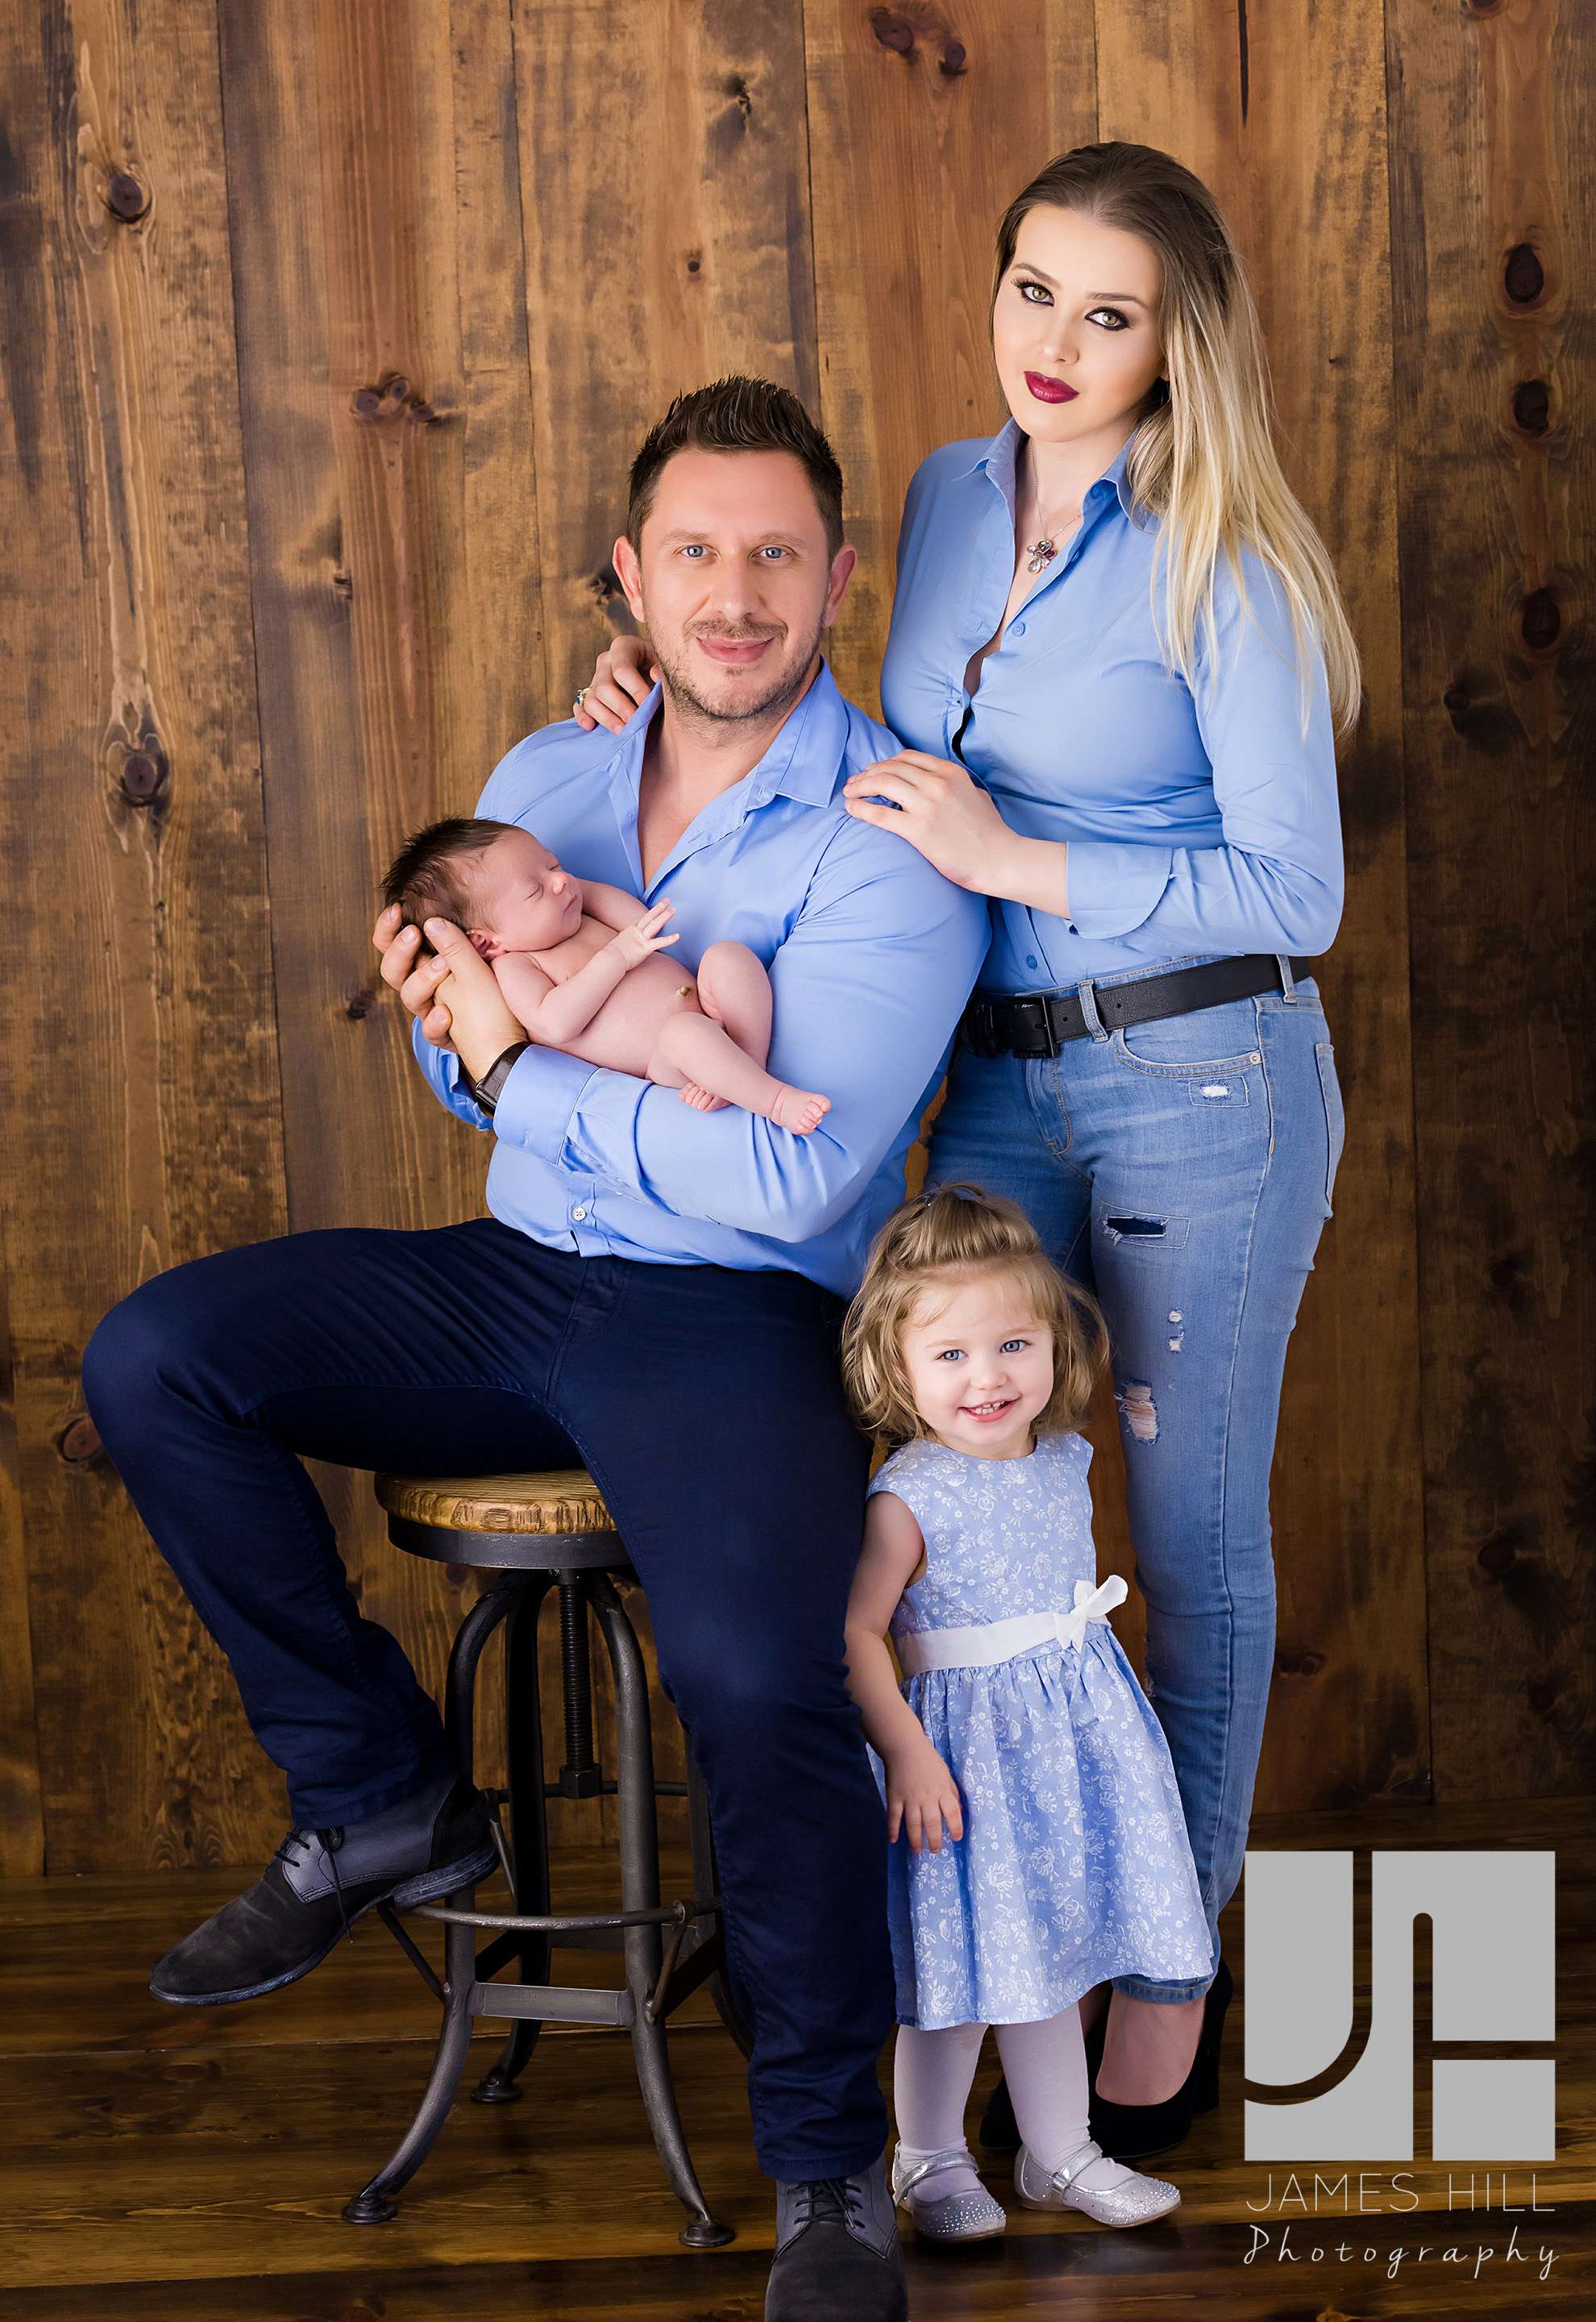  Blue is a wonderful color for this family.